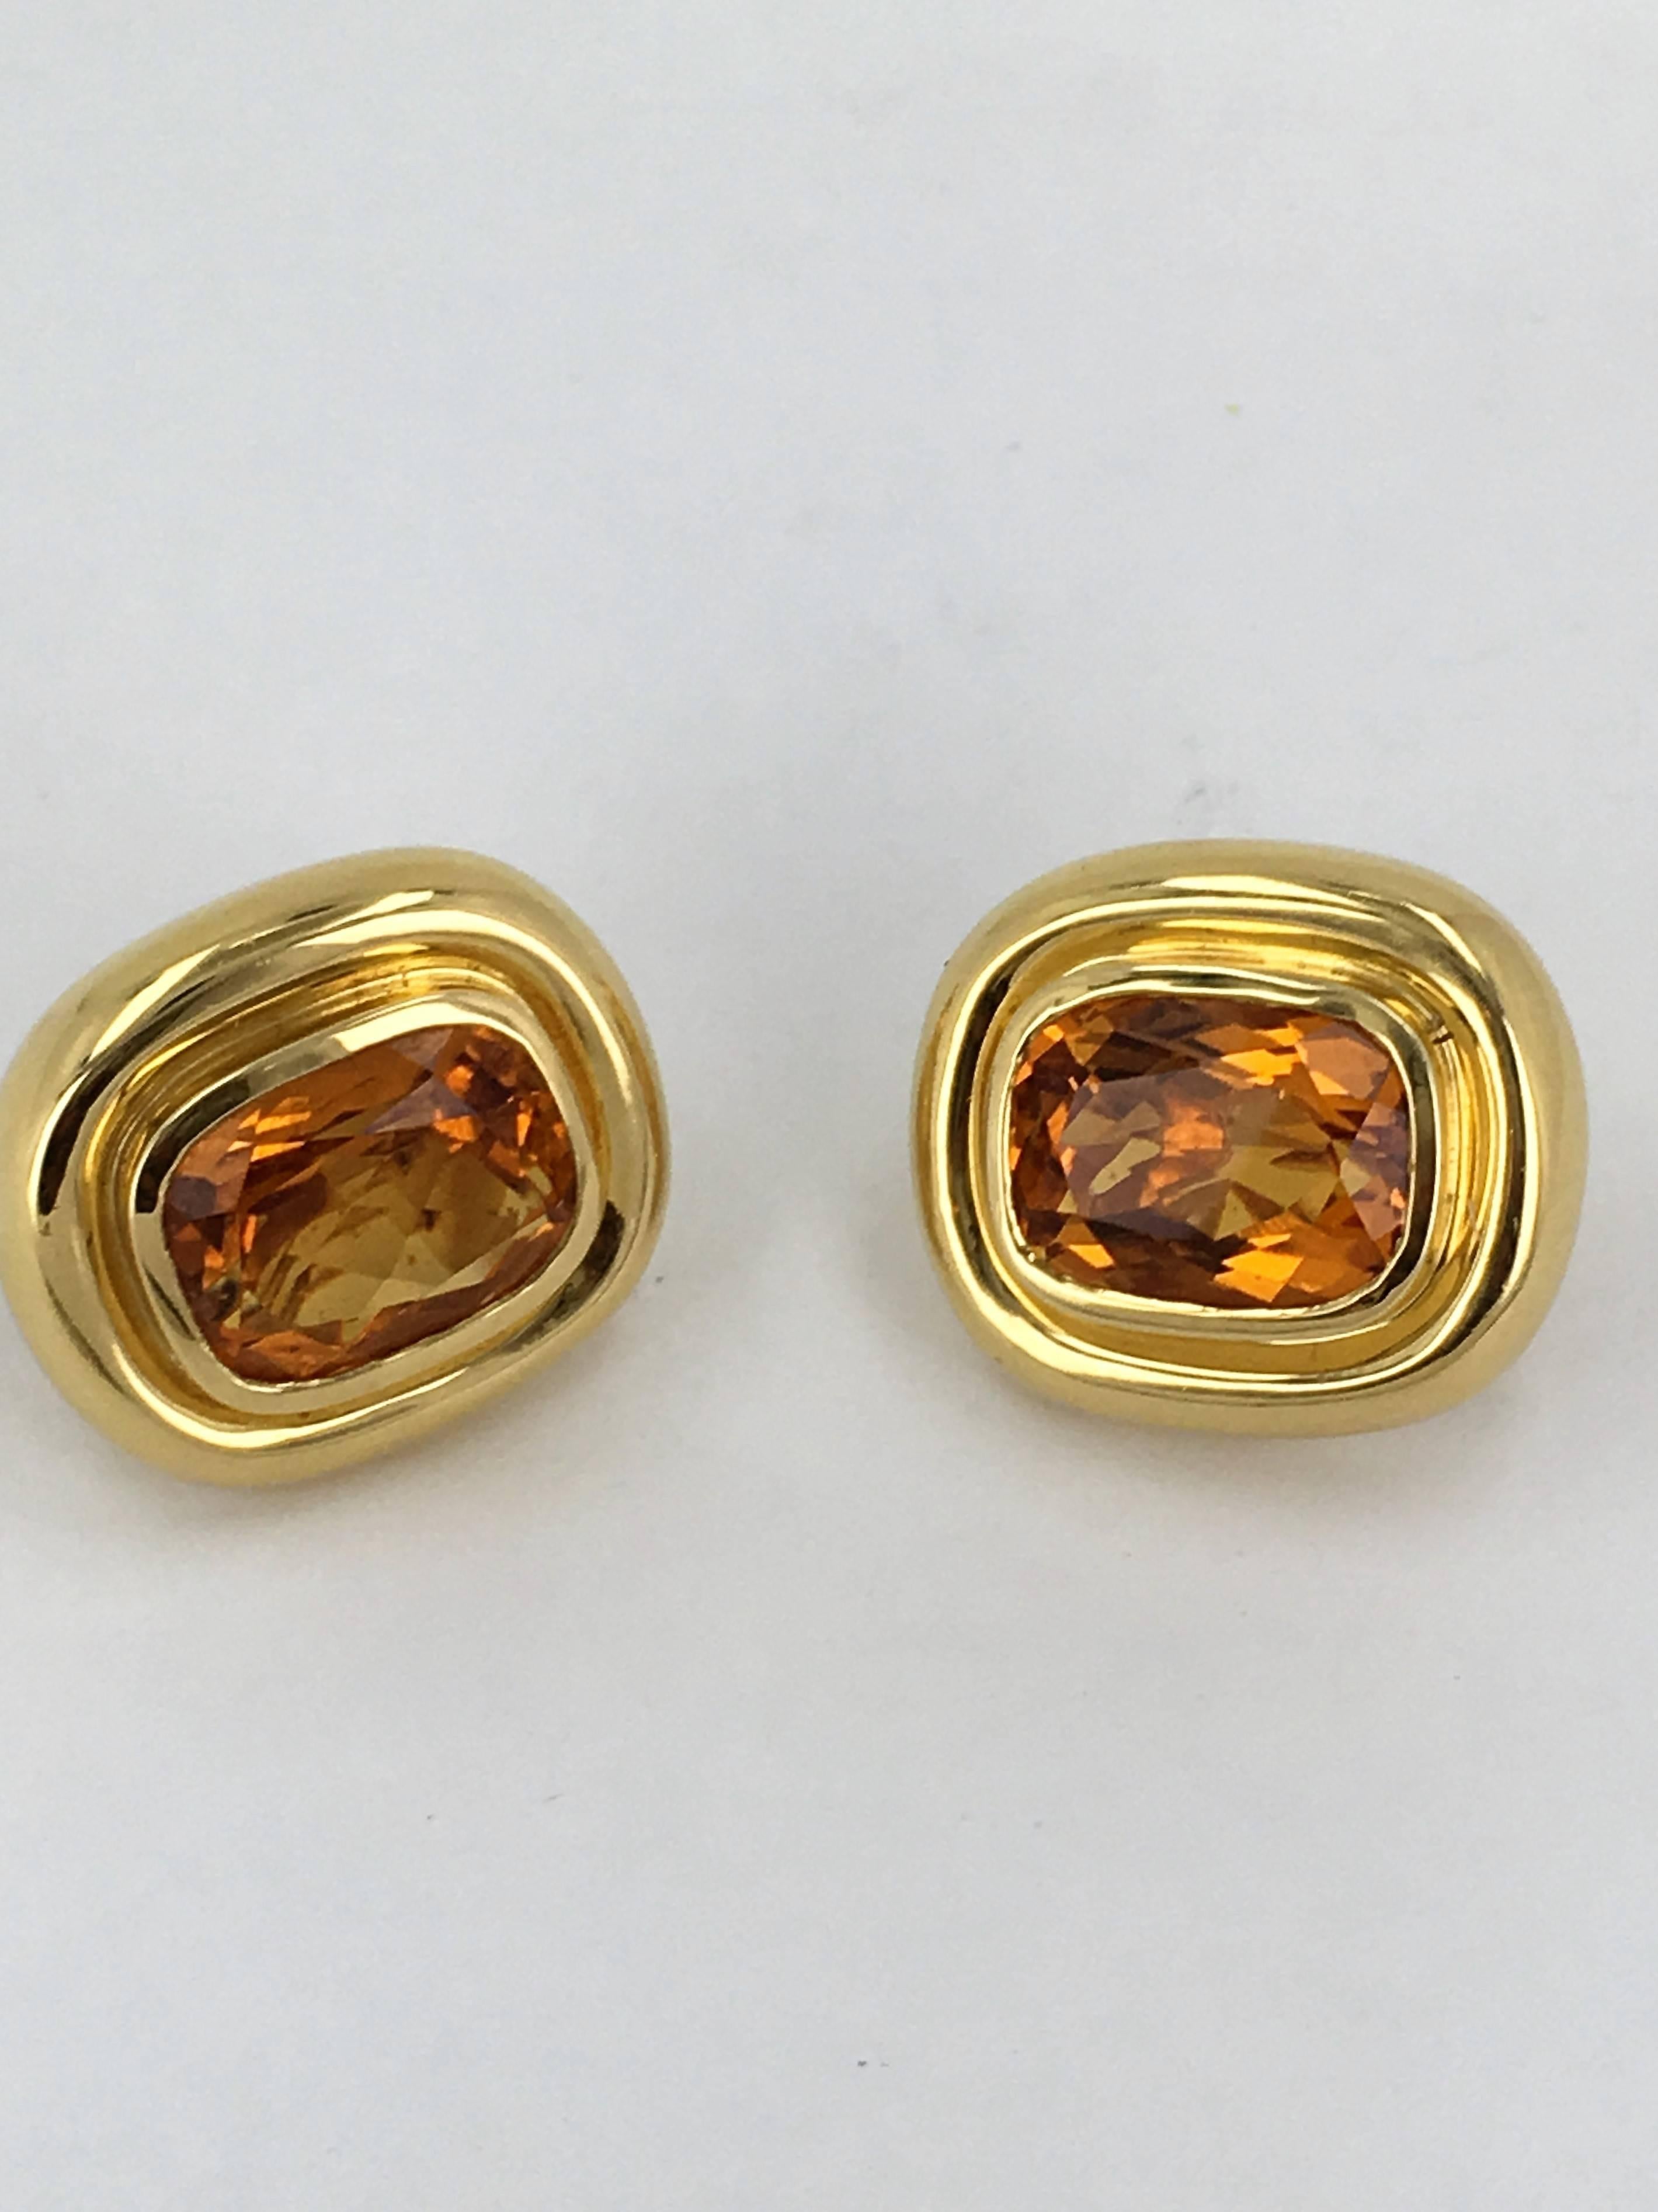 Tiffany Paloma Picasso Topaz earrings on 18ct yellow gold . These are signed by Tiffany and the designer. A truly super pair of stylish earrings.